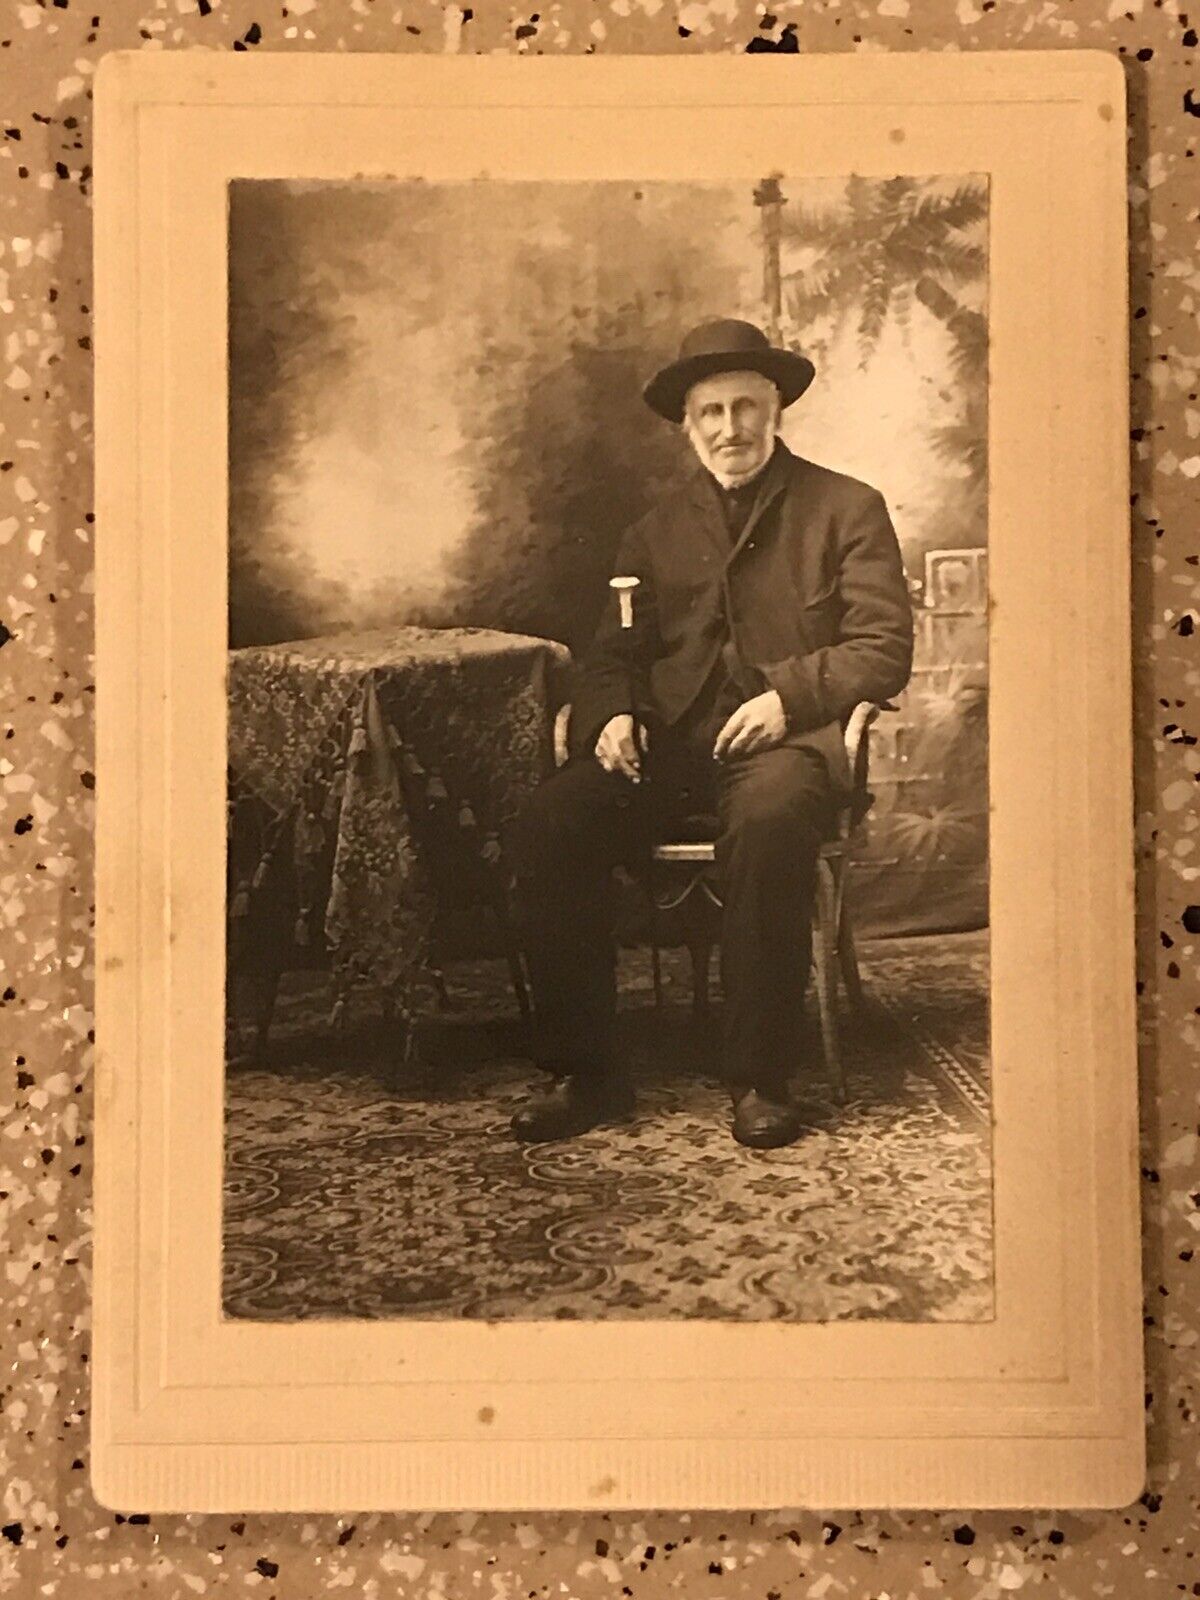 Awesome Antique 1800s Cabinet Photo Card Of Man Sitting Photograph